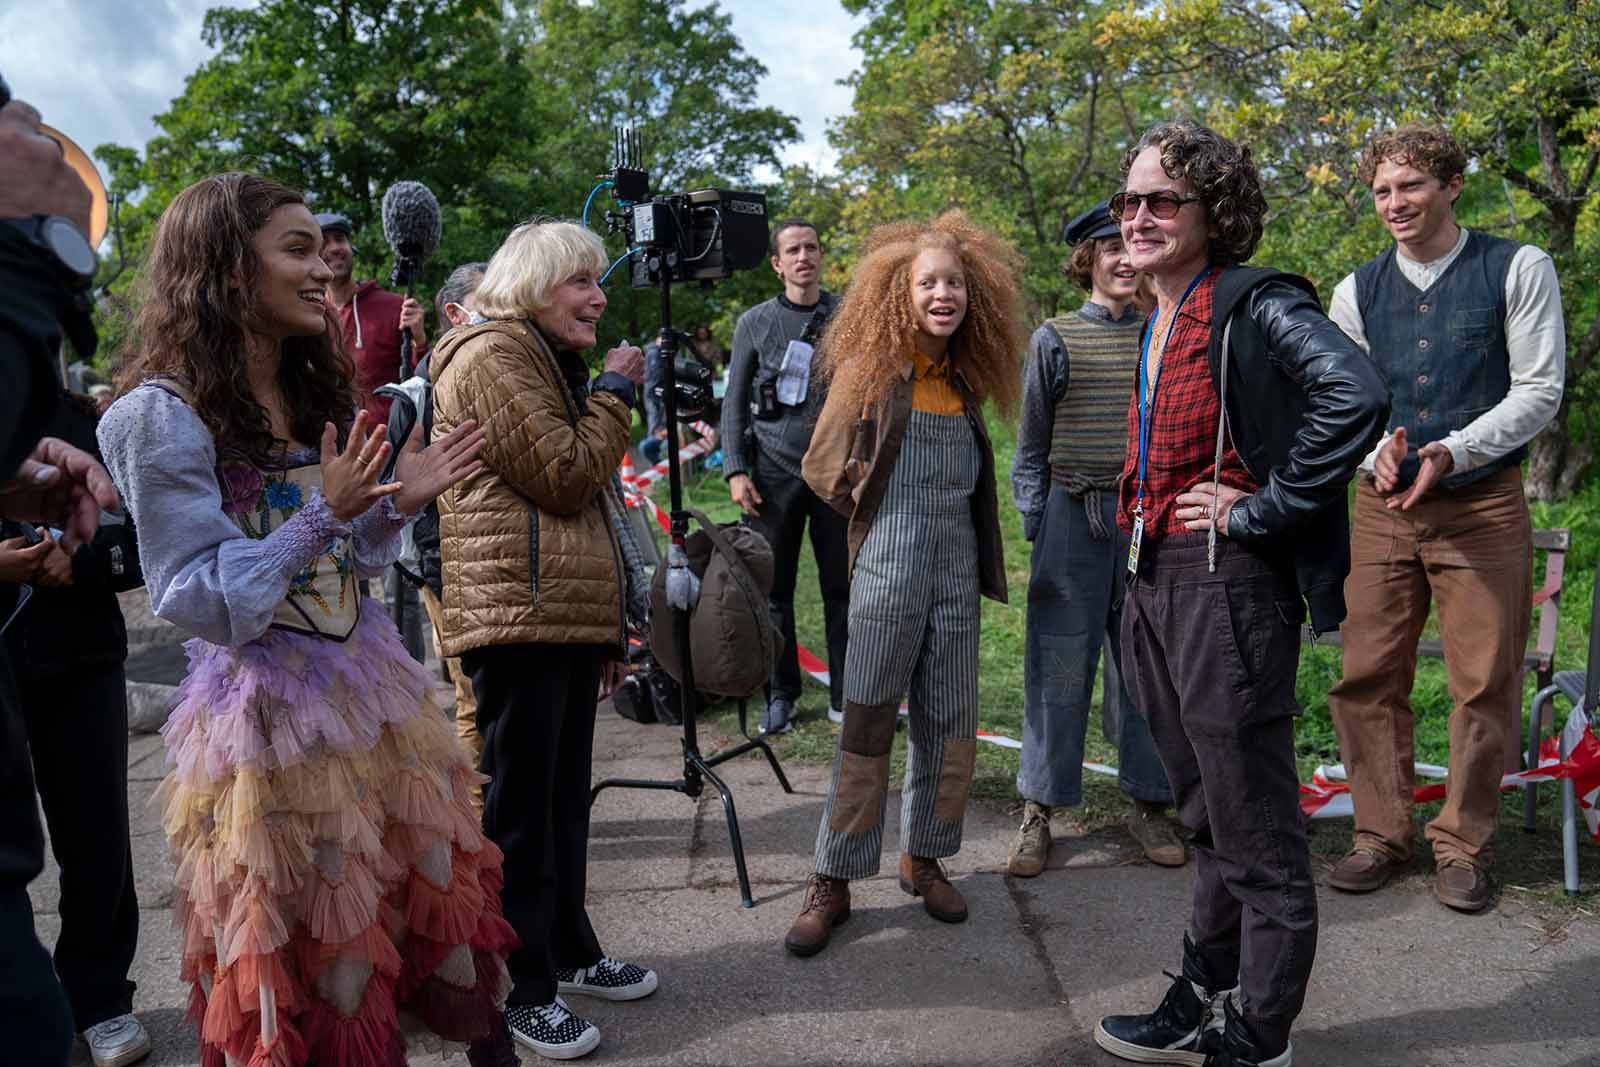 Producer Nina Jacobson on set with the cast of Songbirds and Snakes. Image © Lionsgate